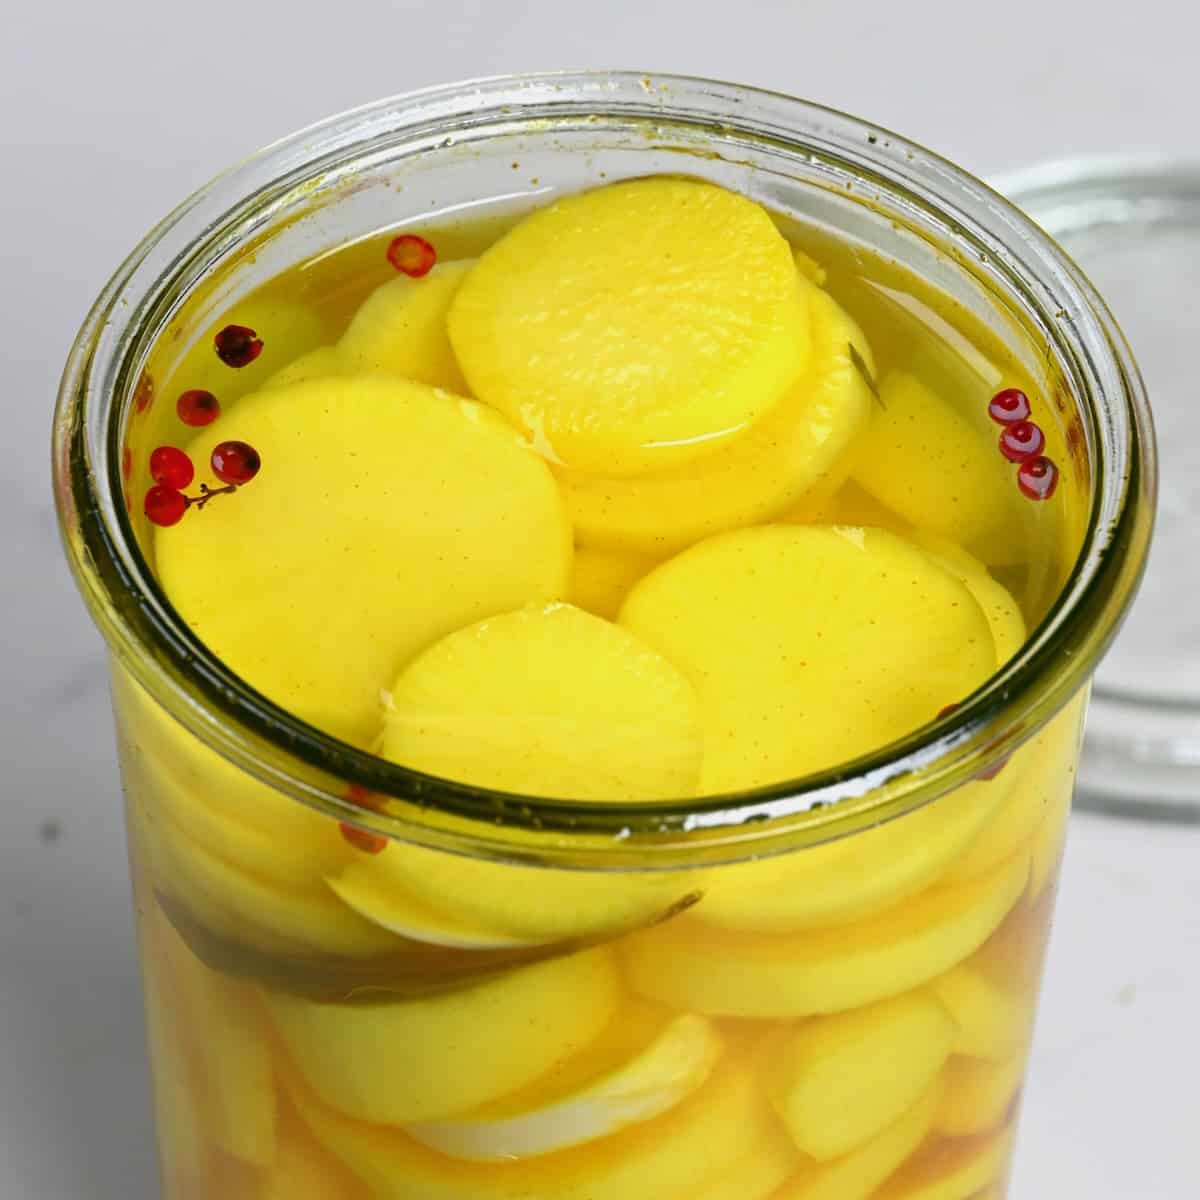 Homemade pickled daikon in a glass jar